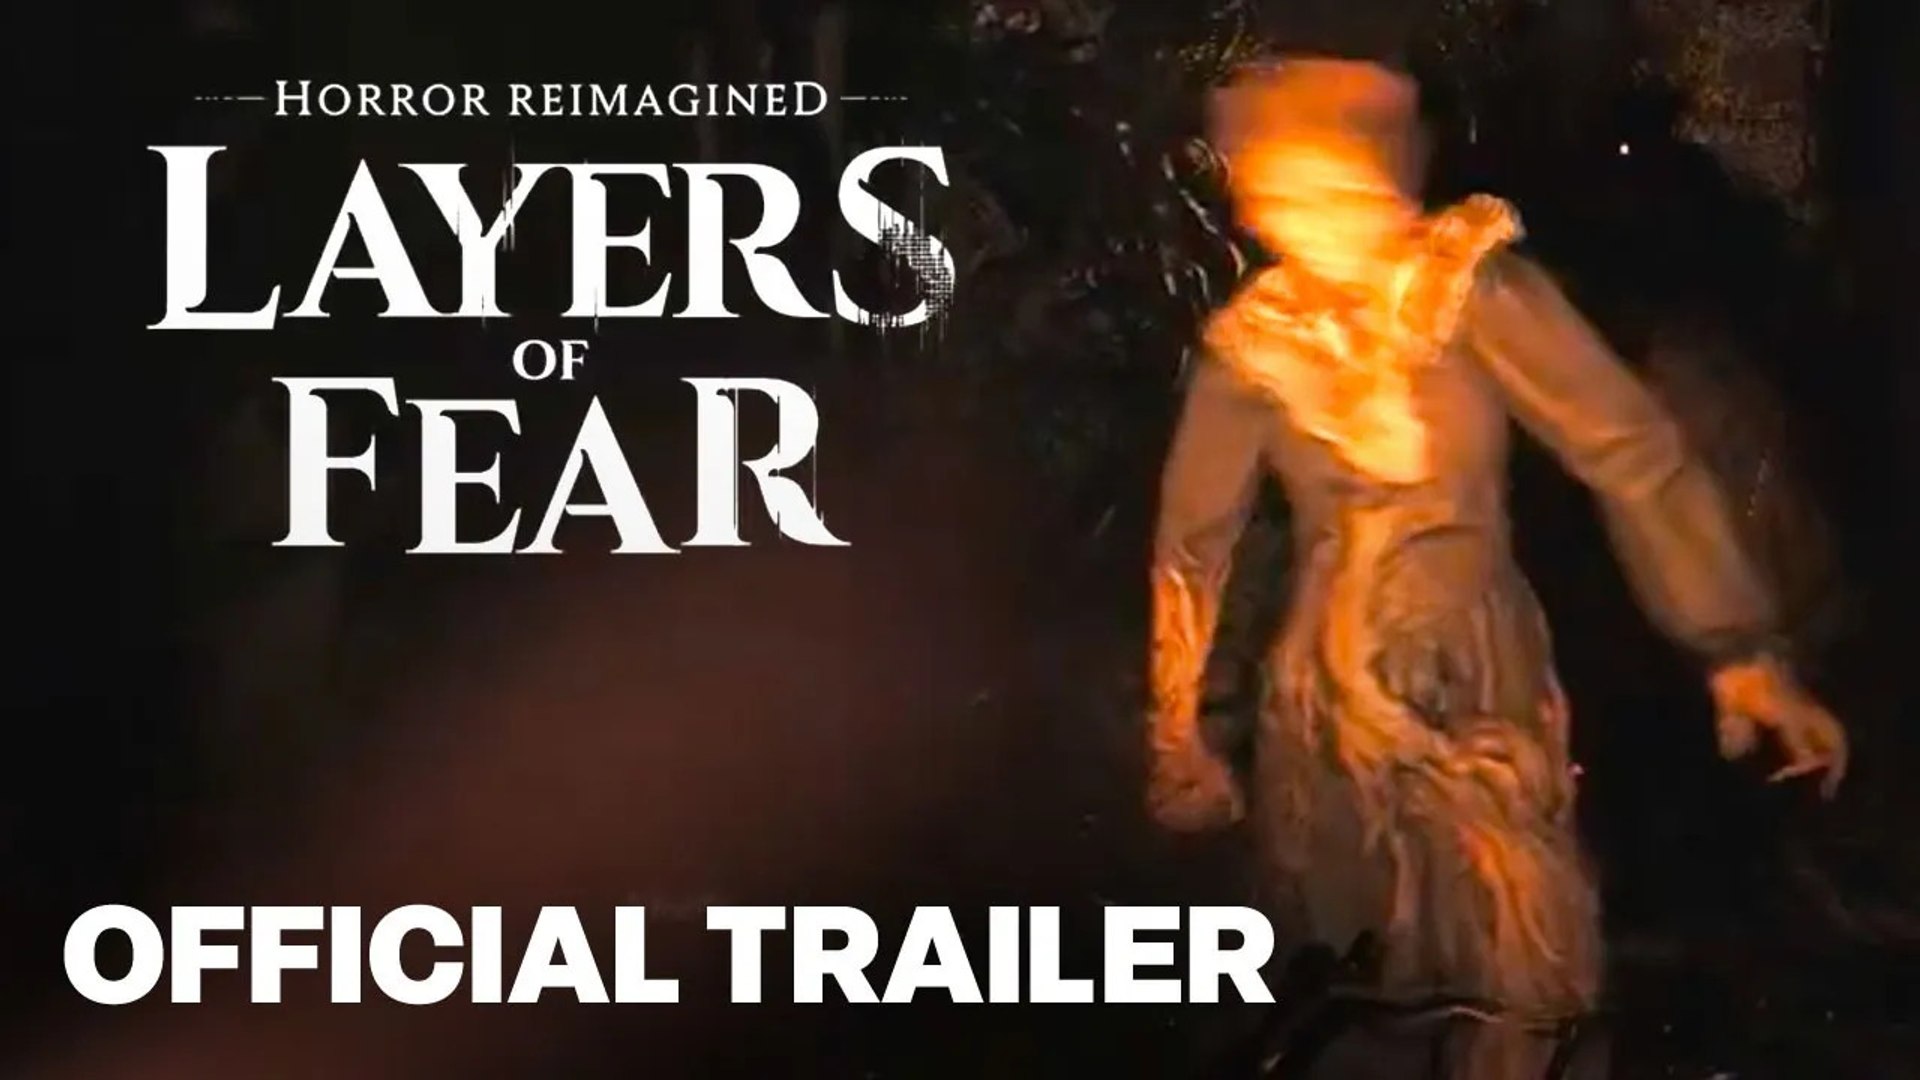 Layers of Fear - Cinematic Story Trailer